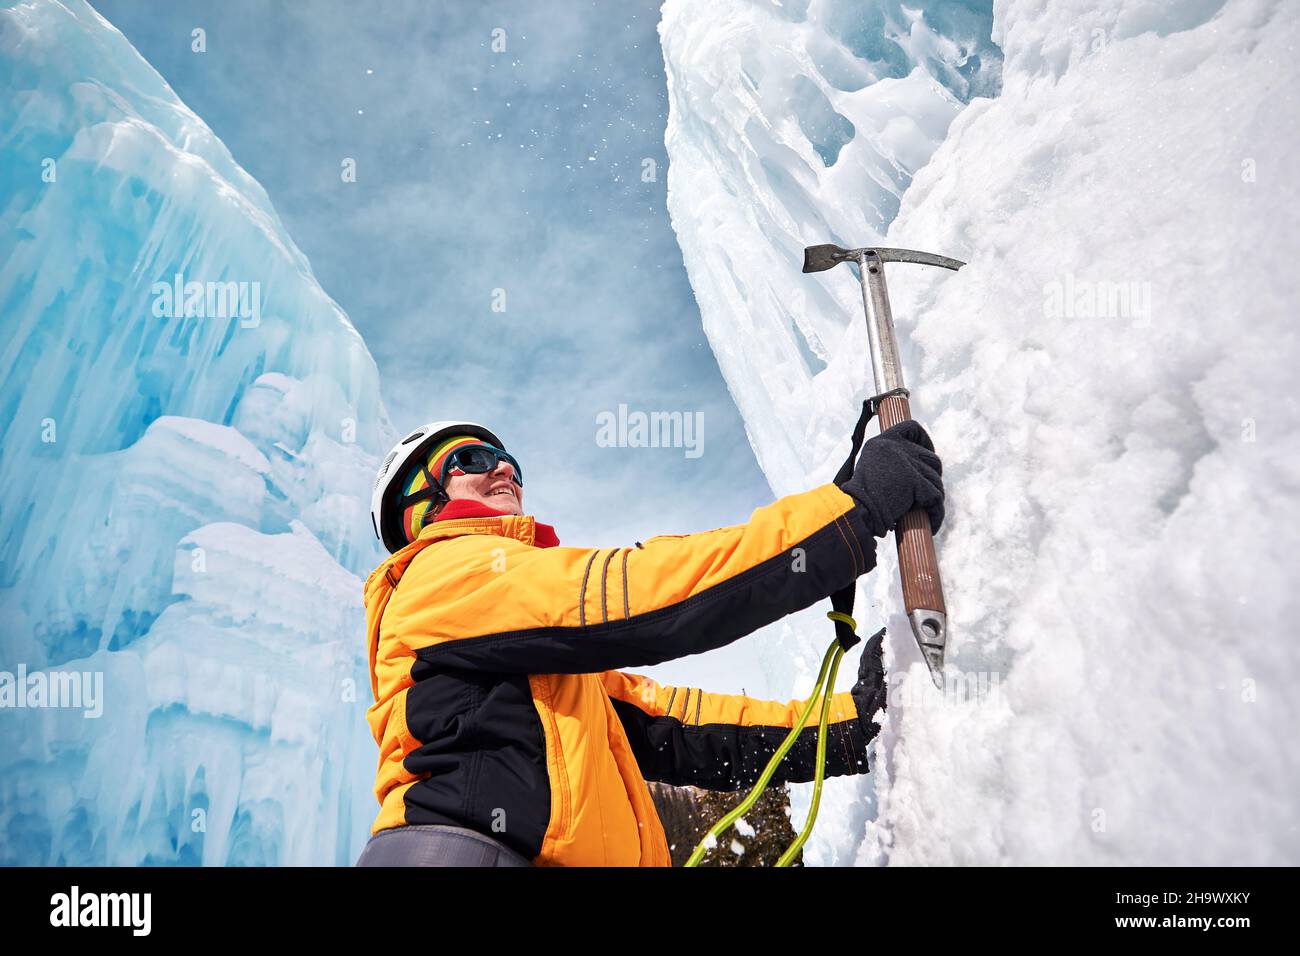 Woman is climbing frozen waterfall in helmet with ice axe in orange jacket in the mountains. Sport mountaineering and alpinism concept. Stock Photo